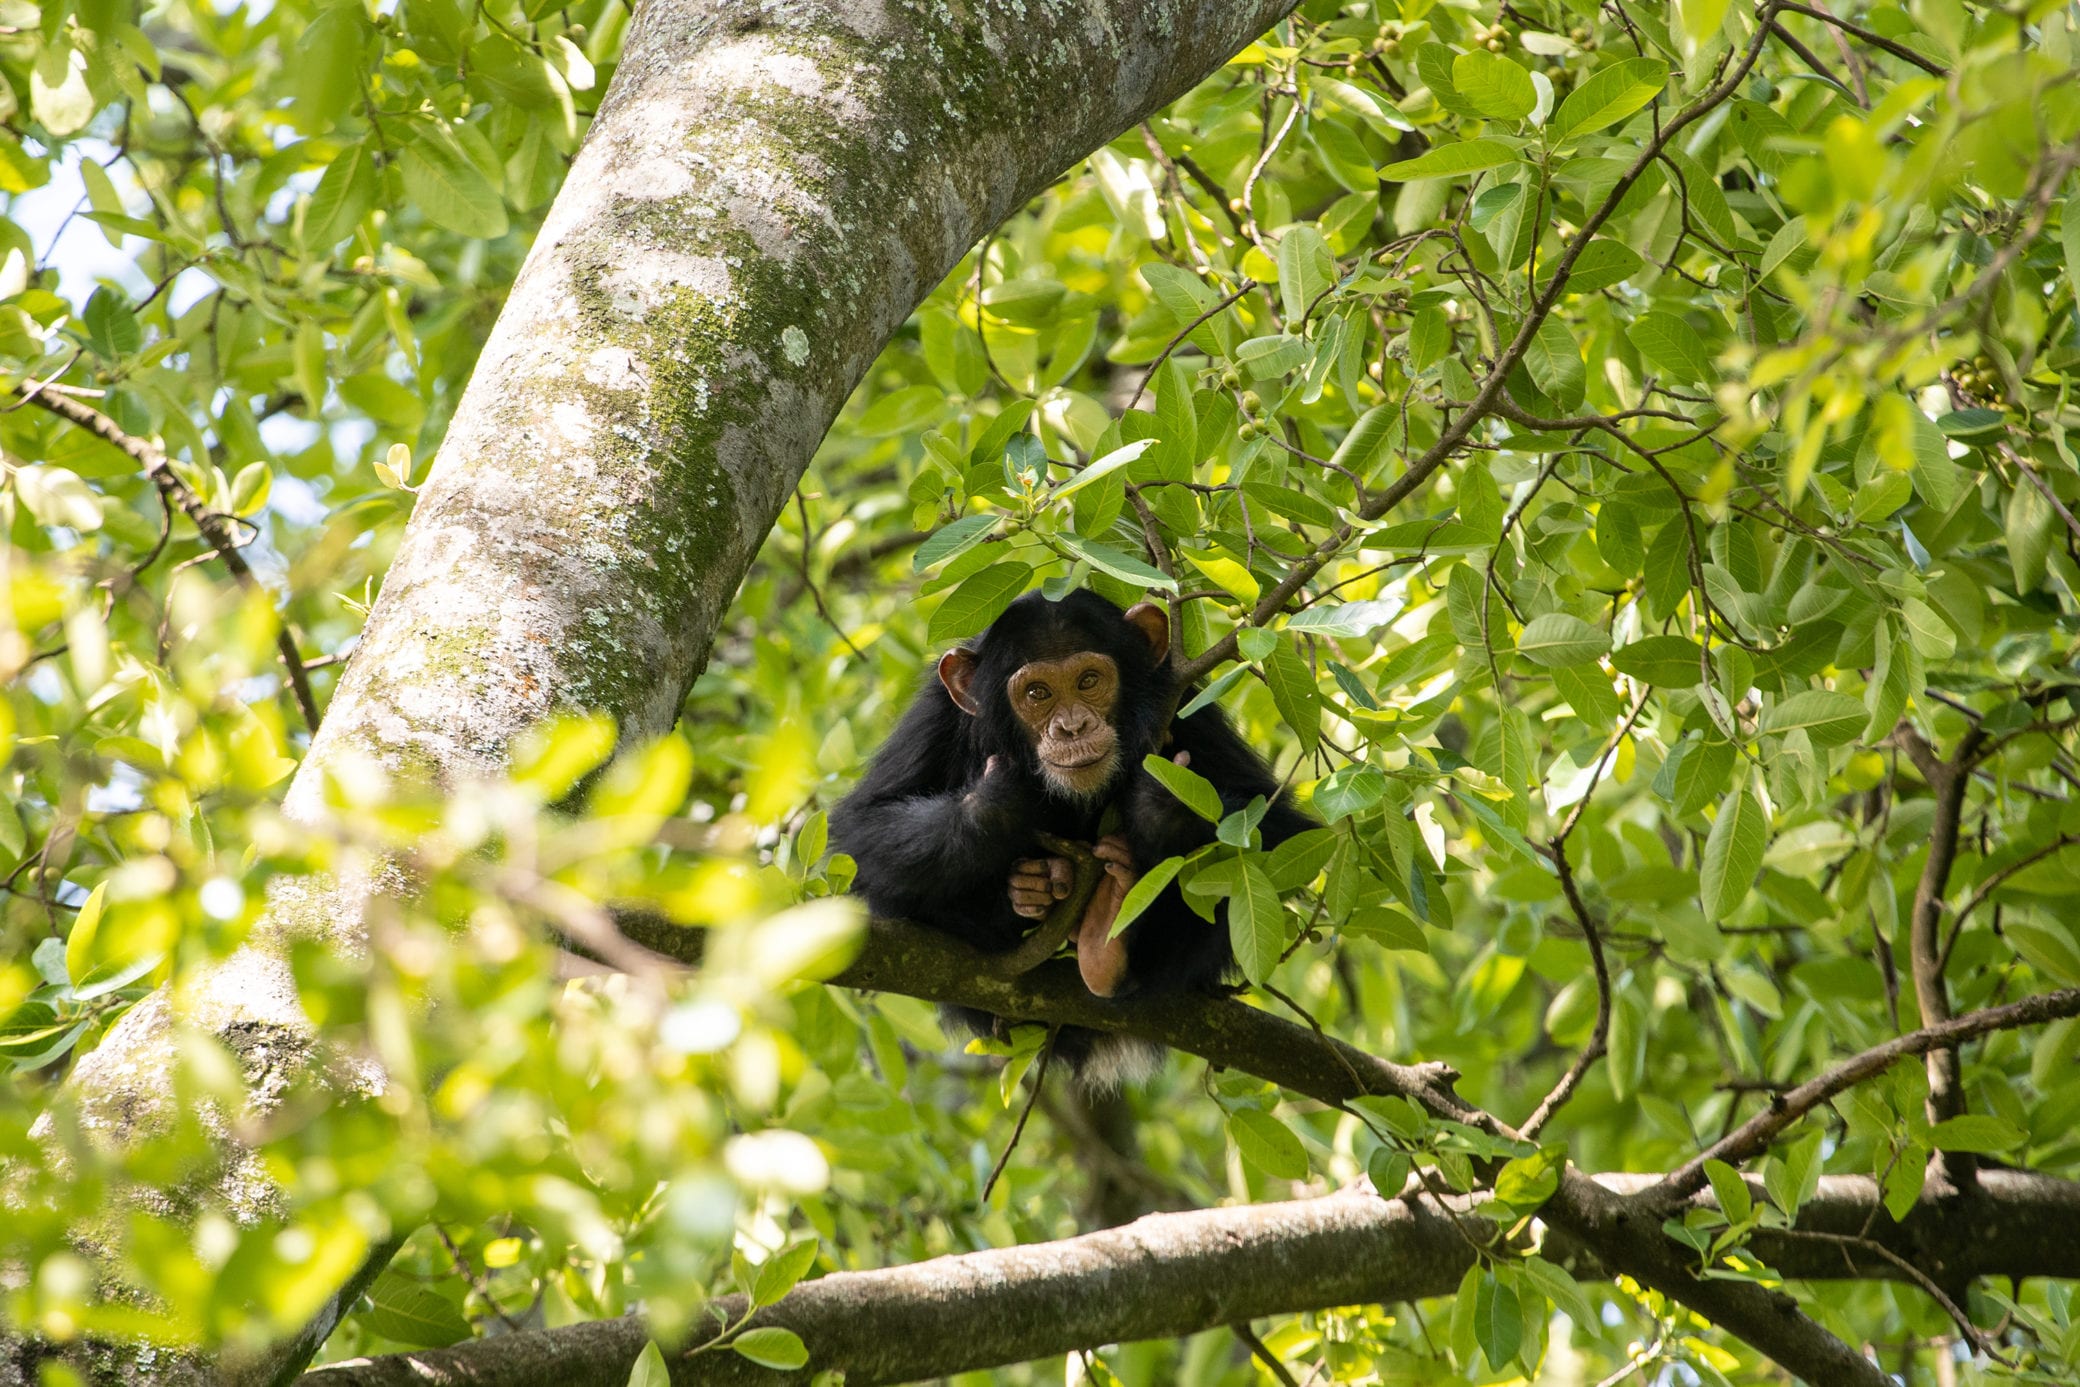 A baby chimpanzee sitting on a branch tree